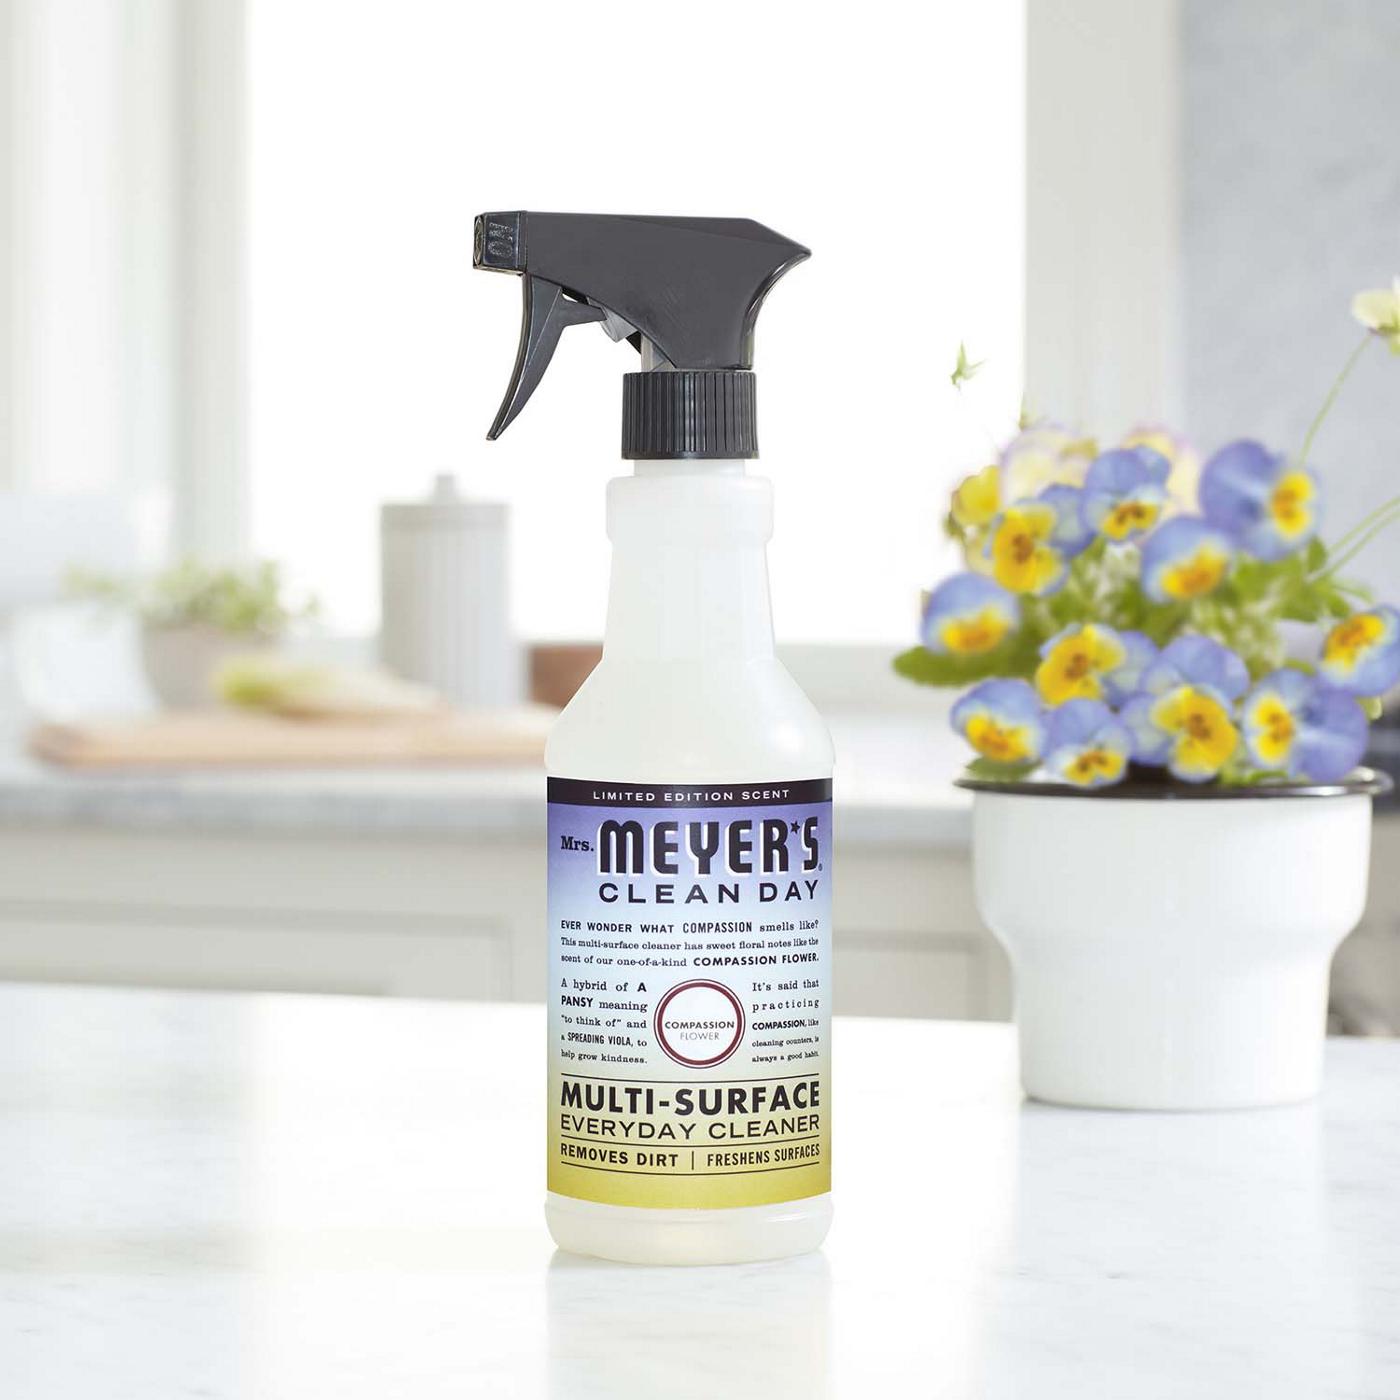 Mrs. Meyer's Clean Day Compassion Flower Multi-Surface Everyday Cleaner Spray; image 4 of 4